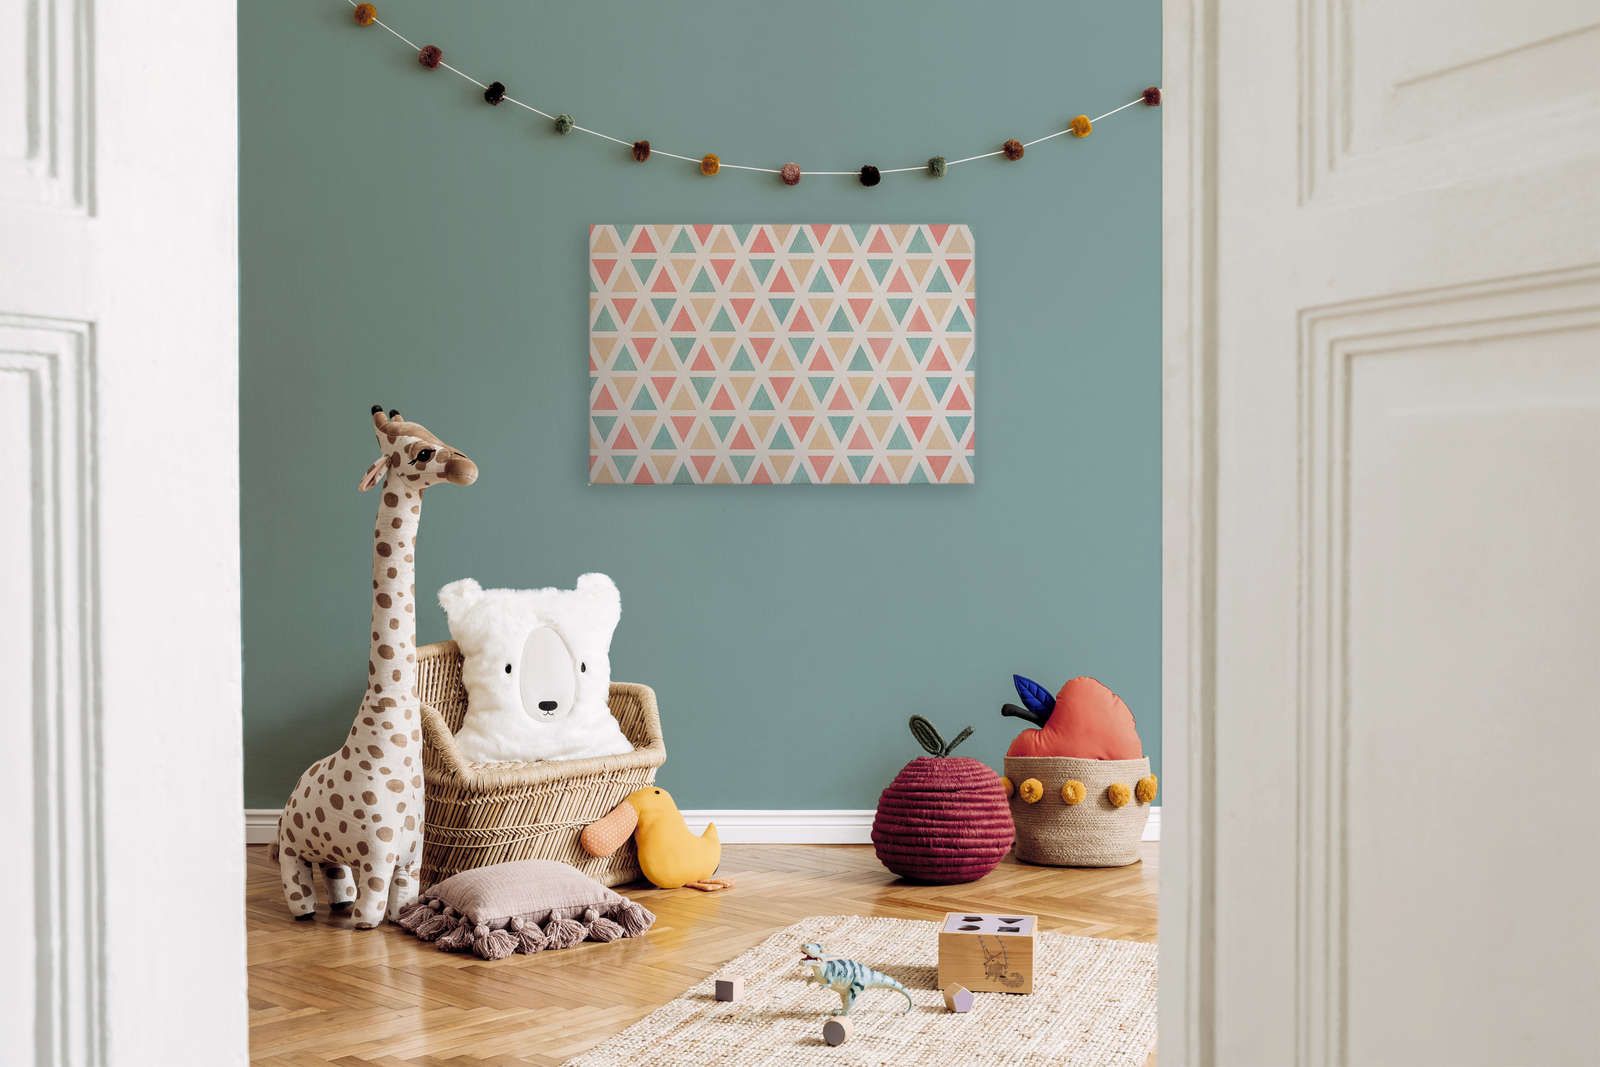             Canvas graphic pattern with colourful triangles - 90 cm x 60 cm
        